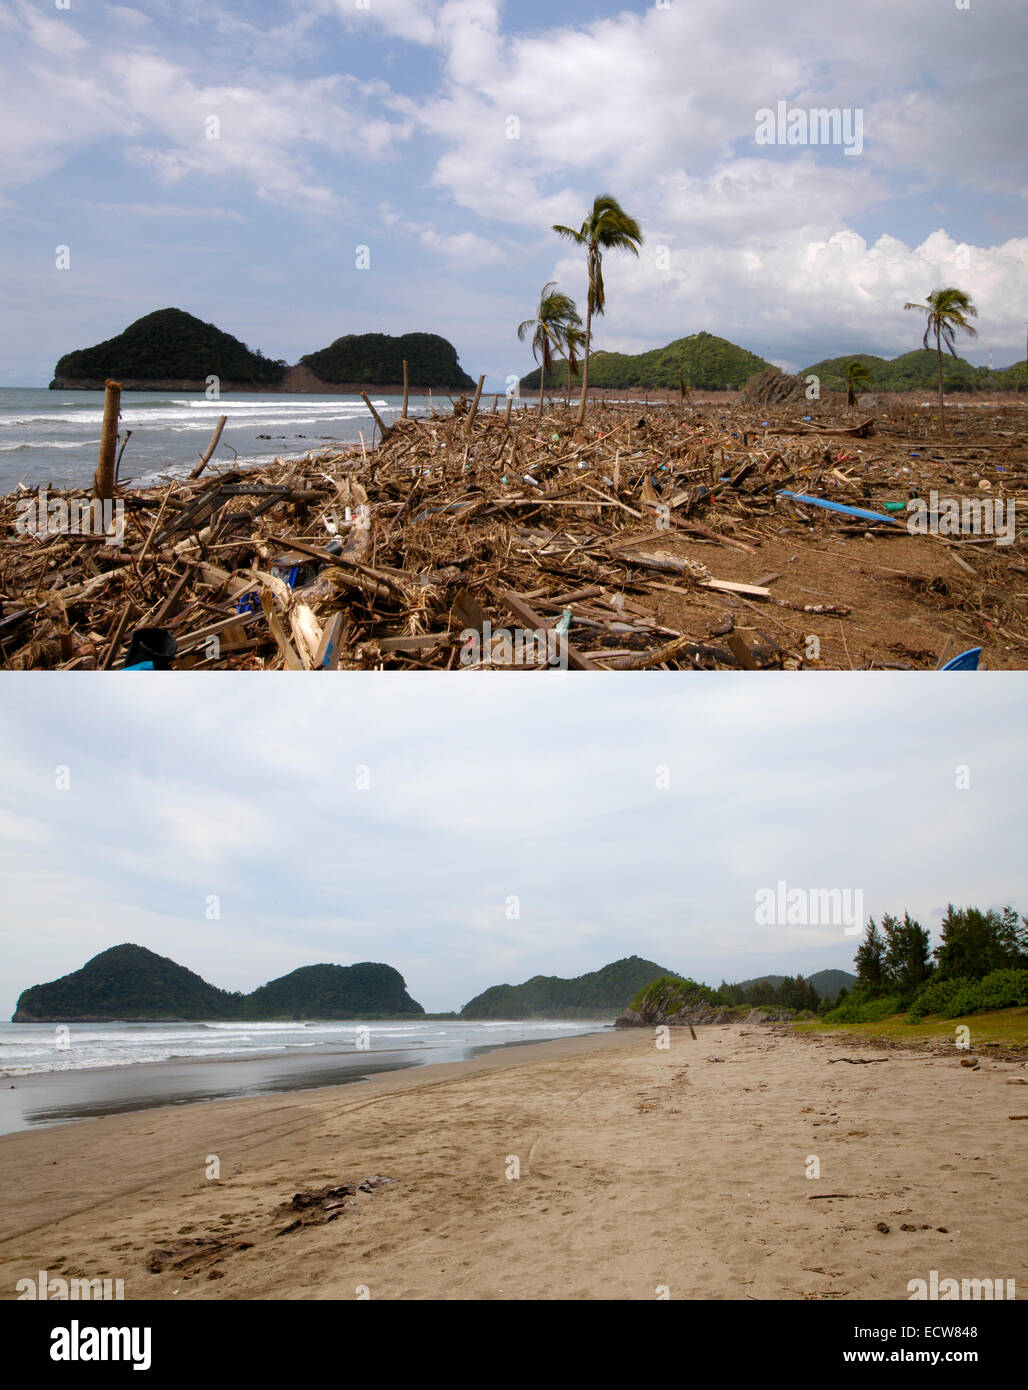 In this composite image a comparison has been made between a scene in 2005 (TOP) and 2014 (BOTTOM) ***TOP IMAGE*** LHOK SADAY, ACEH, INDONESIA - JANUARY 8: A completely devastated village after the Tsunami in Lhok Sadey, Aceh, Indonesia  -150 miles from southern Asia's massive earthquake's epicenter on Tuesday January 8, 2005.  Lhok Sadey, Aceh, Indonesia.  ***BOTTOM IMAGE*** LHOK SADAY, ACEH, INDONESIA - DECEMBER 14: A mostly unused beach prior to the ten year anniversary of the 2004 earthquake and tsunami on December 14, 2014 in Lhok Saday, Aceh, Indonesia. Aceh was the worst hit location, b Stock Photo